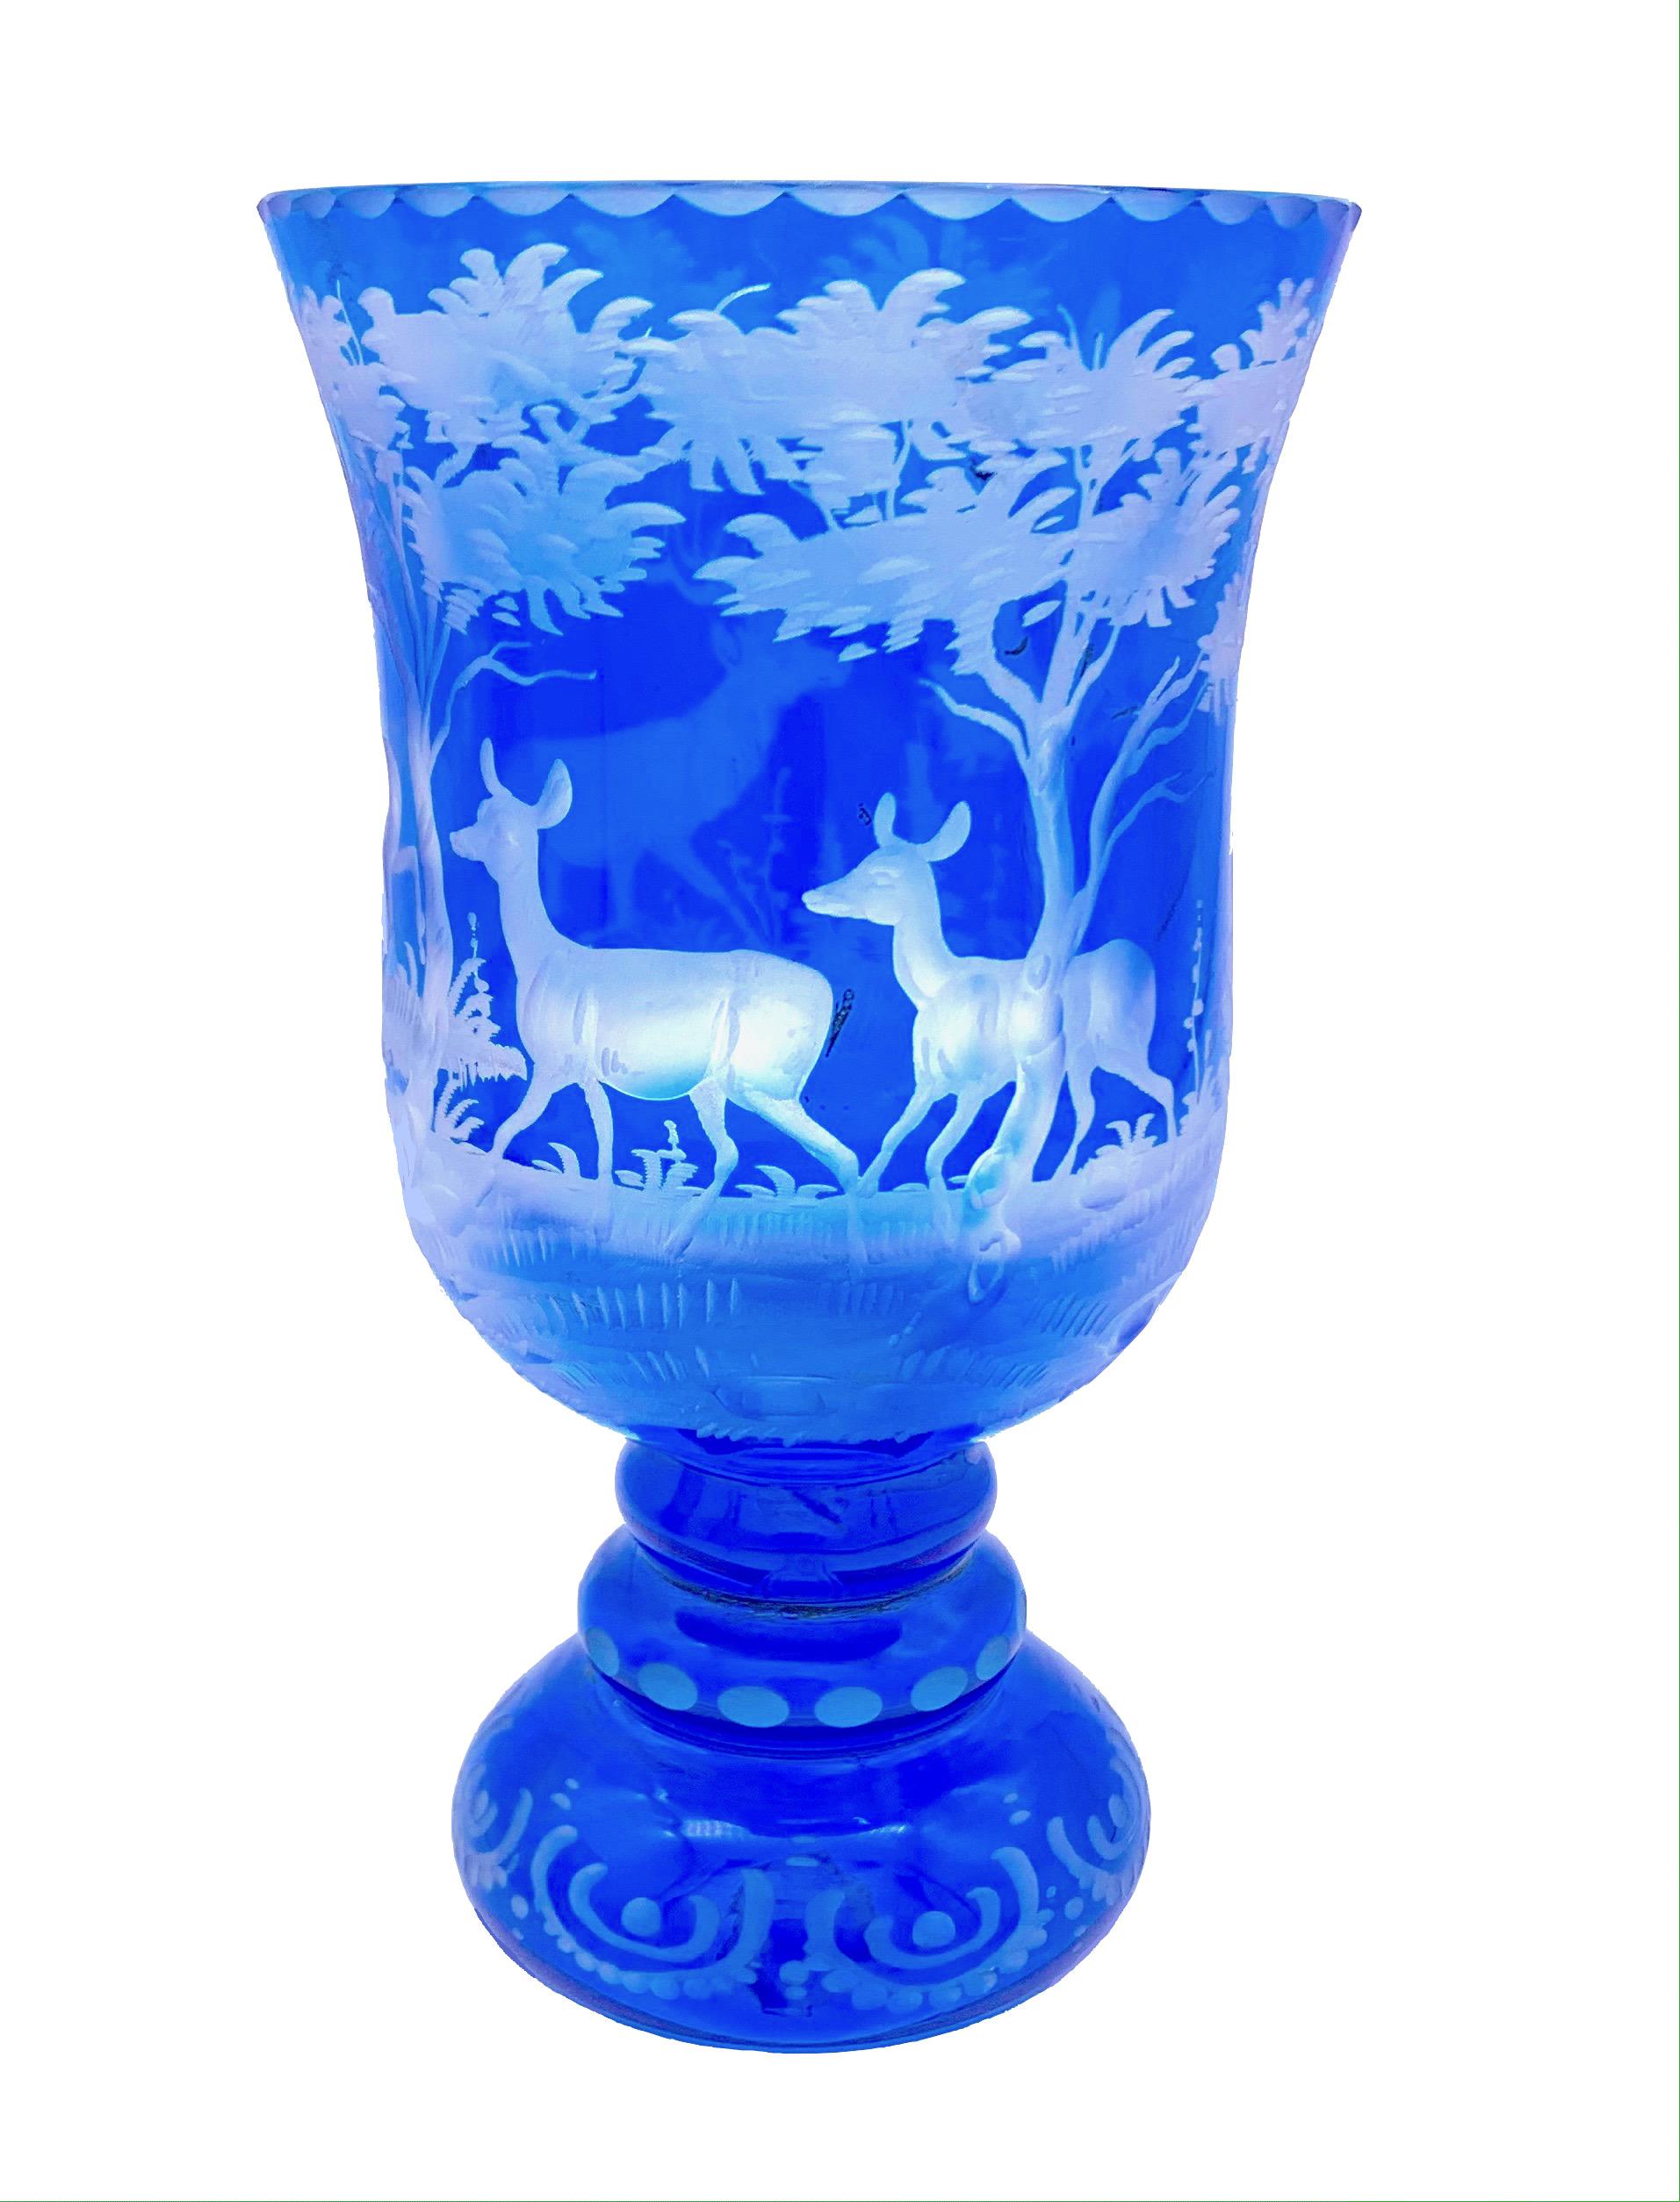 These two wine glases of blue and white crystal glass have been delicately engraved and show dear in a forest clearing.